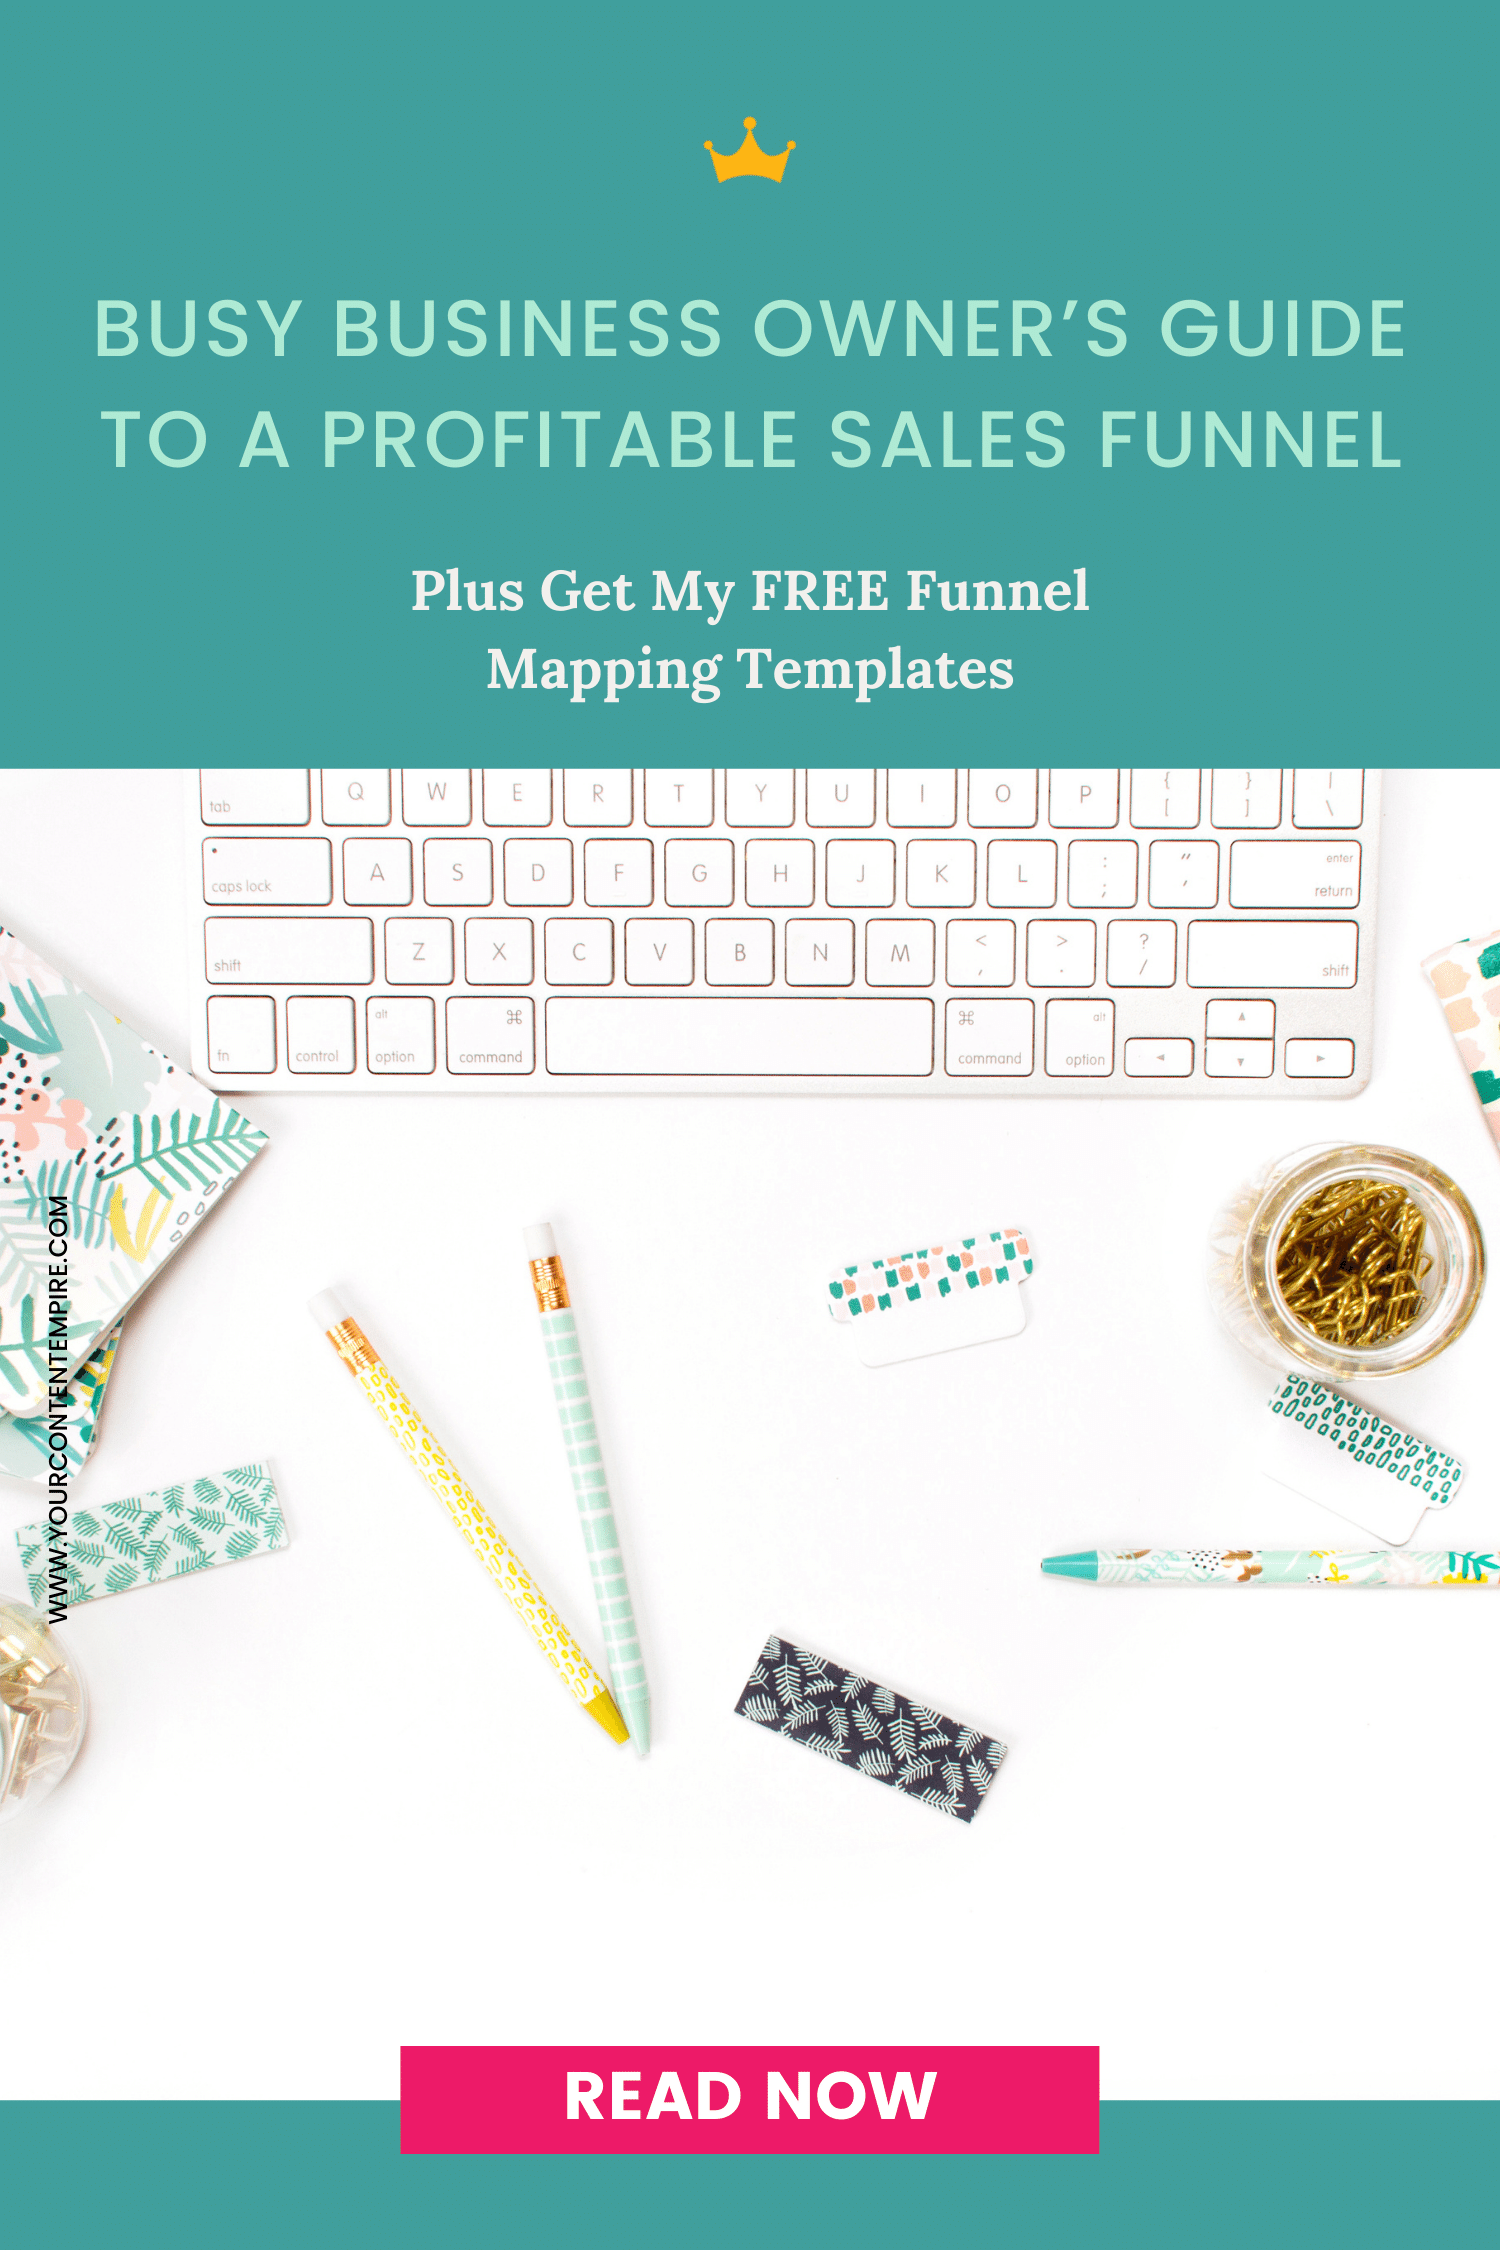 Busy Business Owner’s Guide to a Profitable Sales Funnel